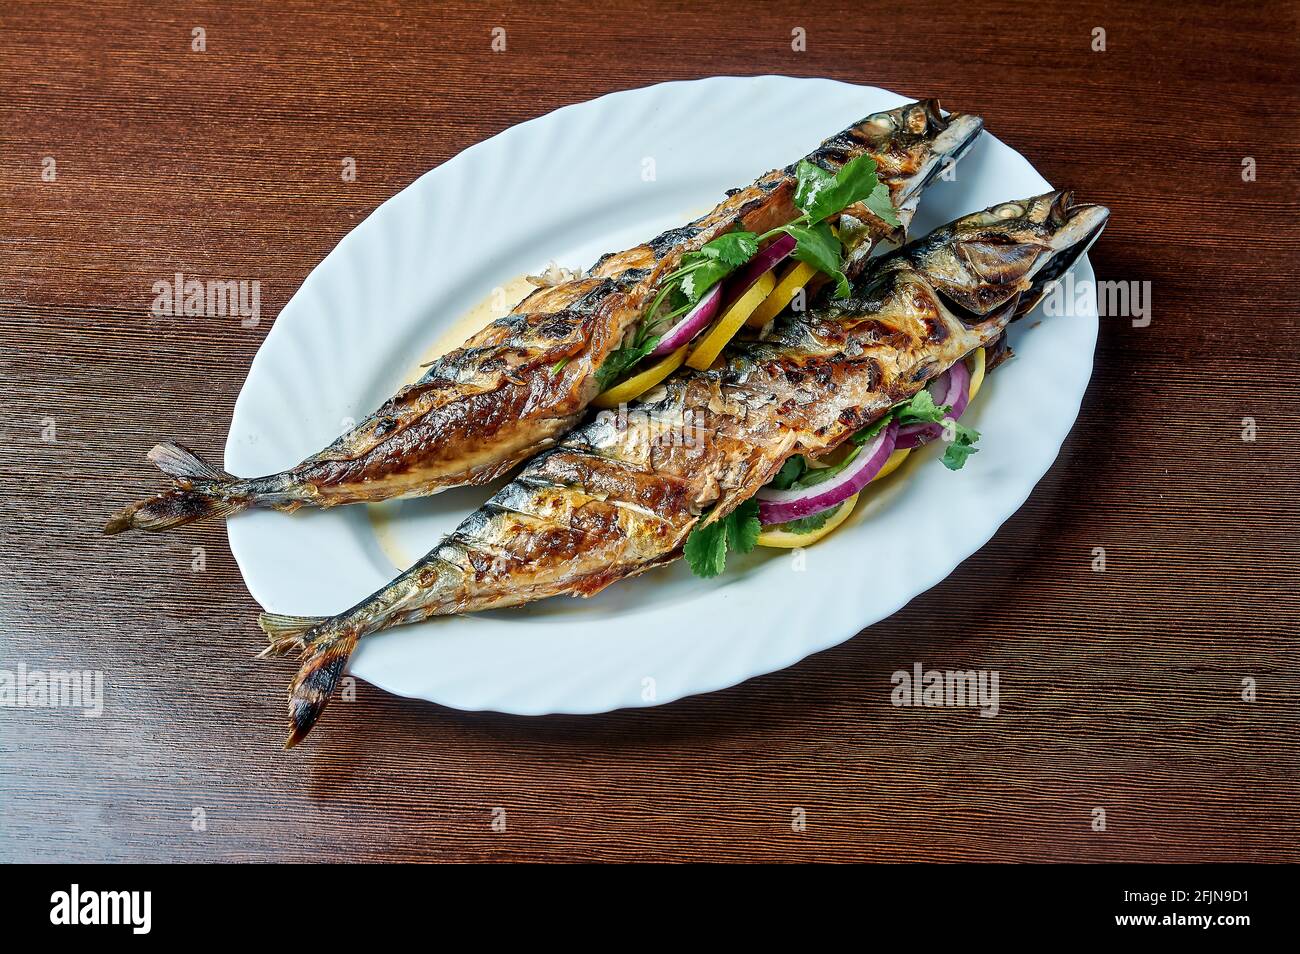 Mackerel baked on the grill lies on a white plate Stock Photo